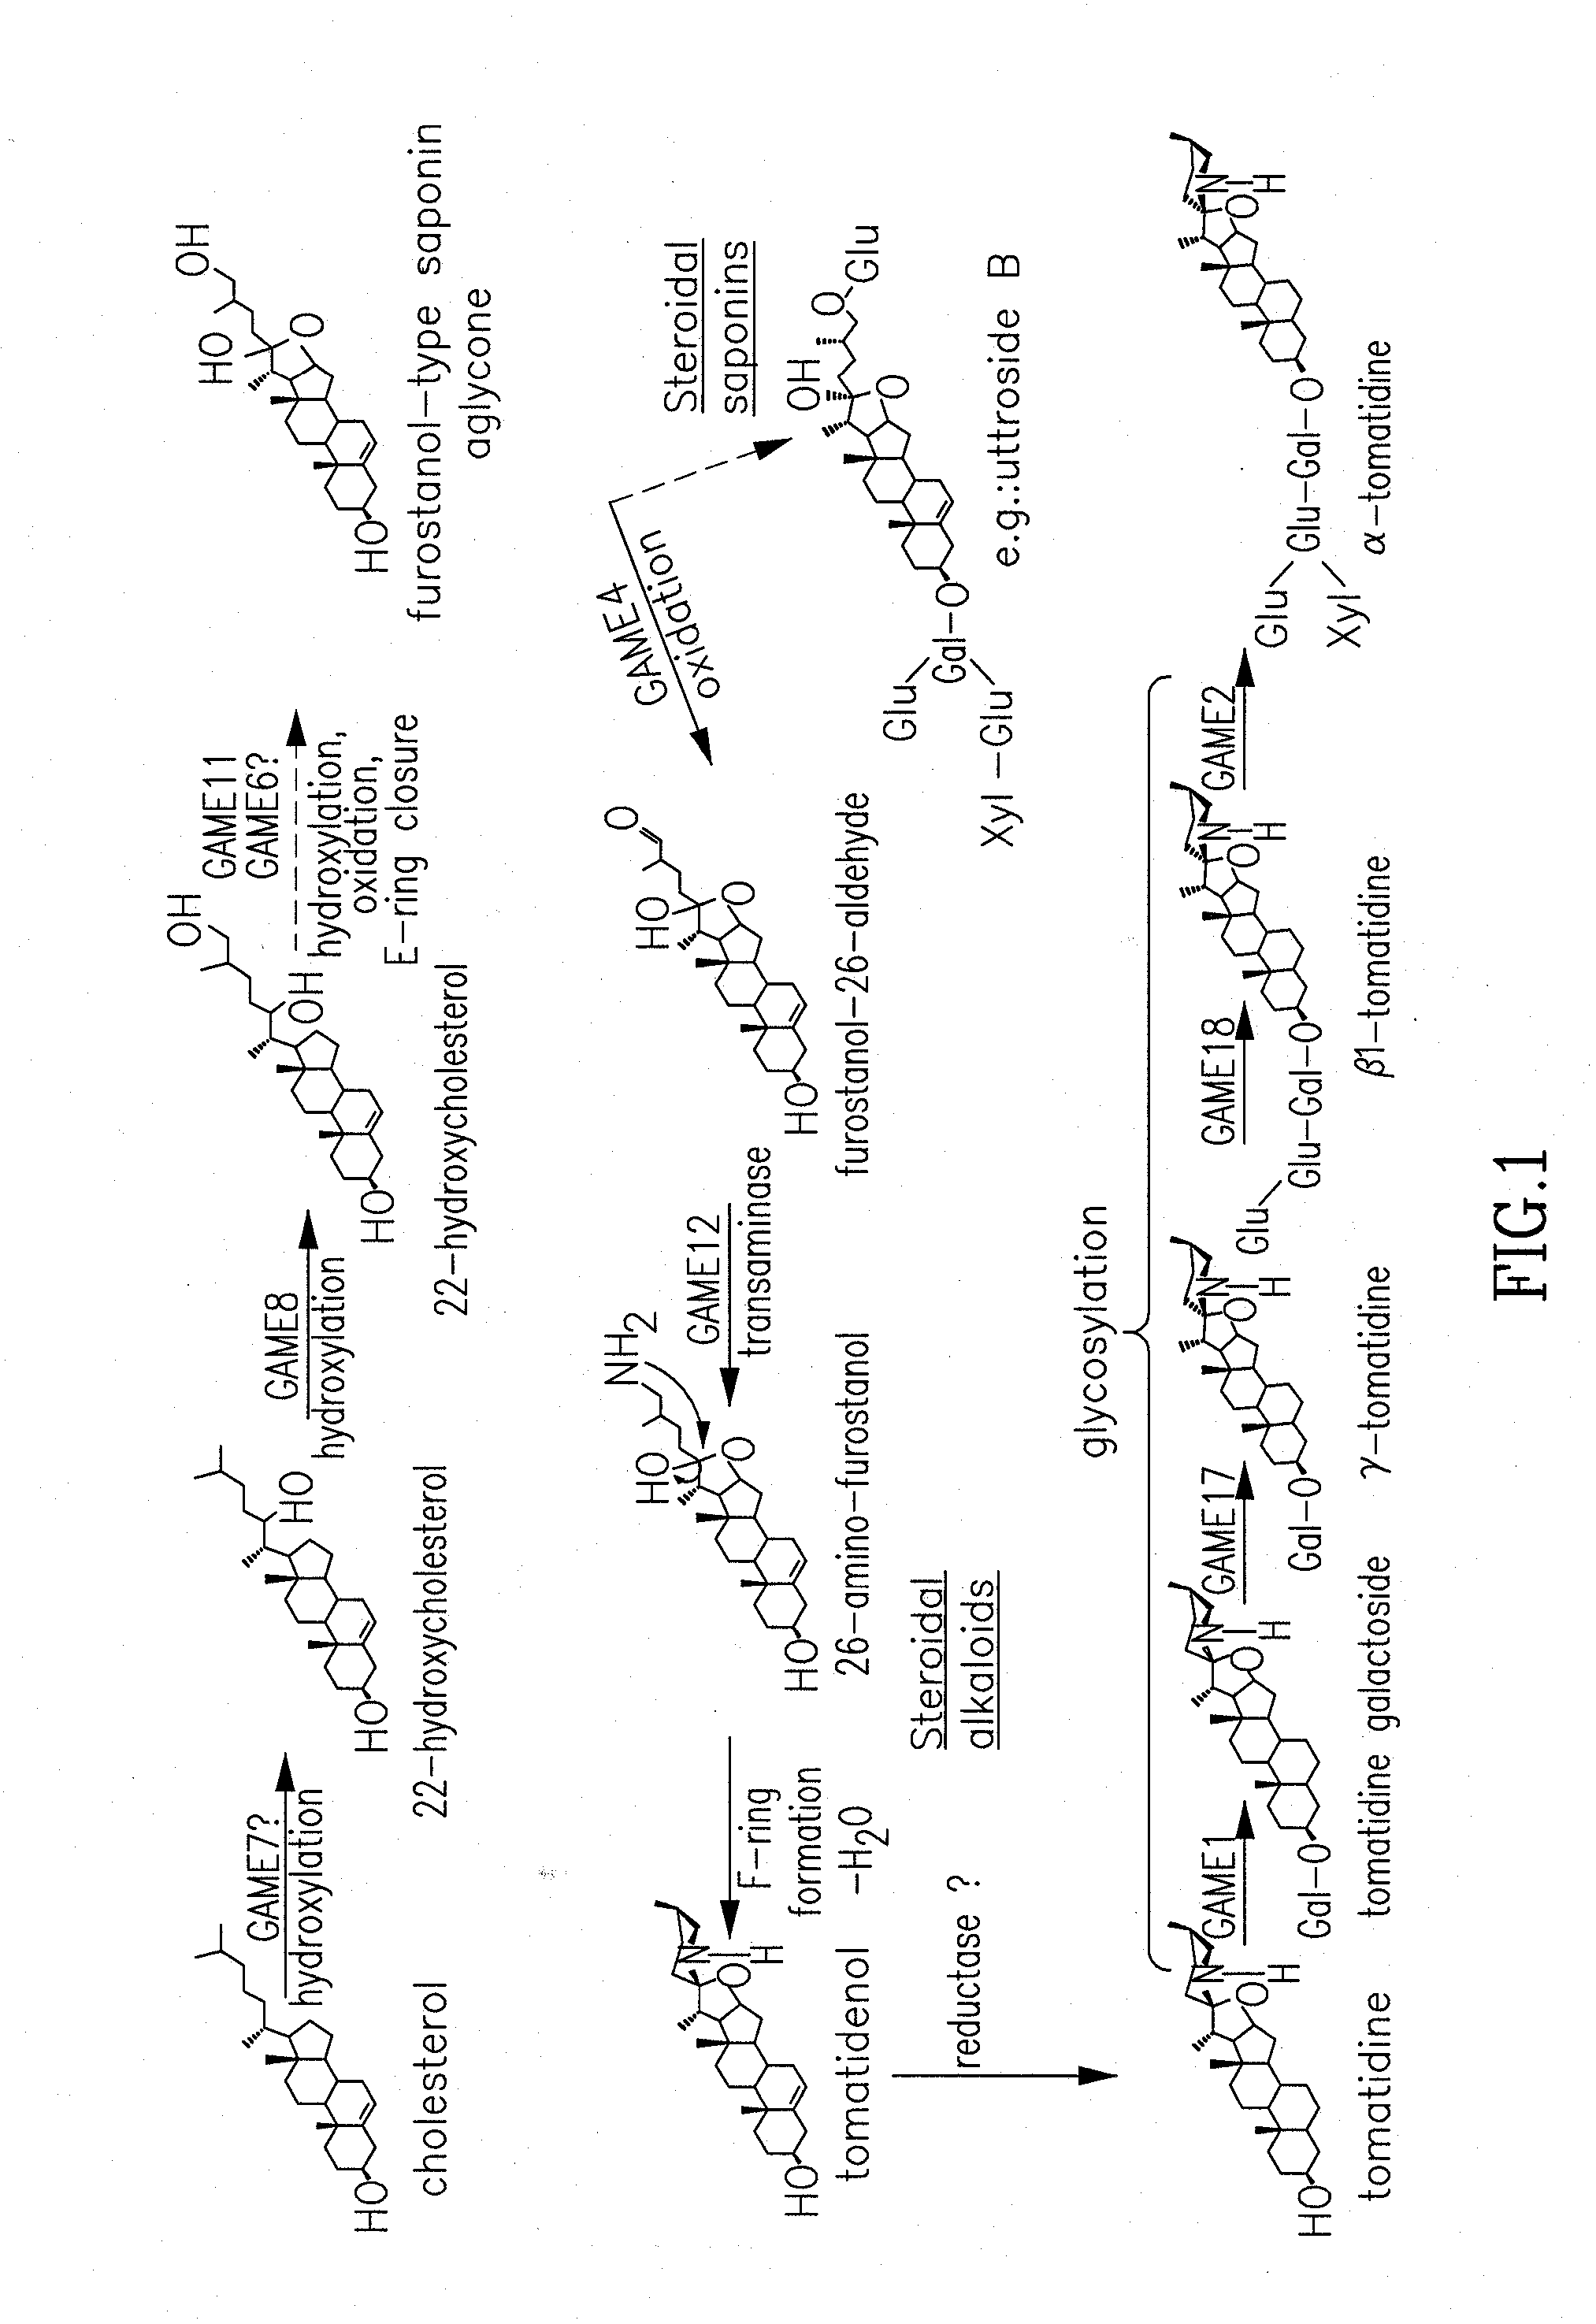 Plant with altered content of steroidal glycoalkaloids